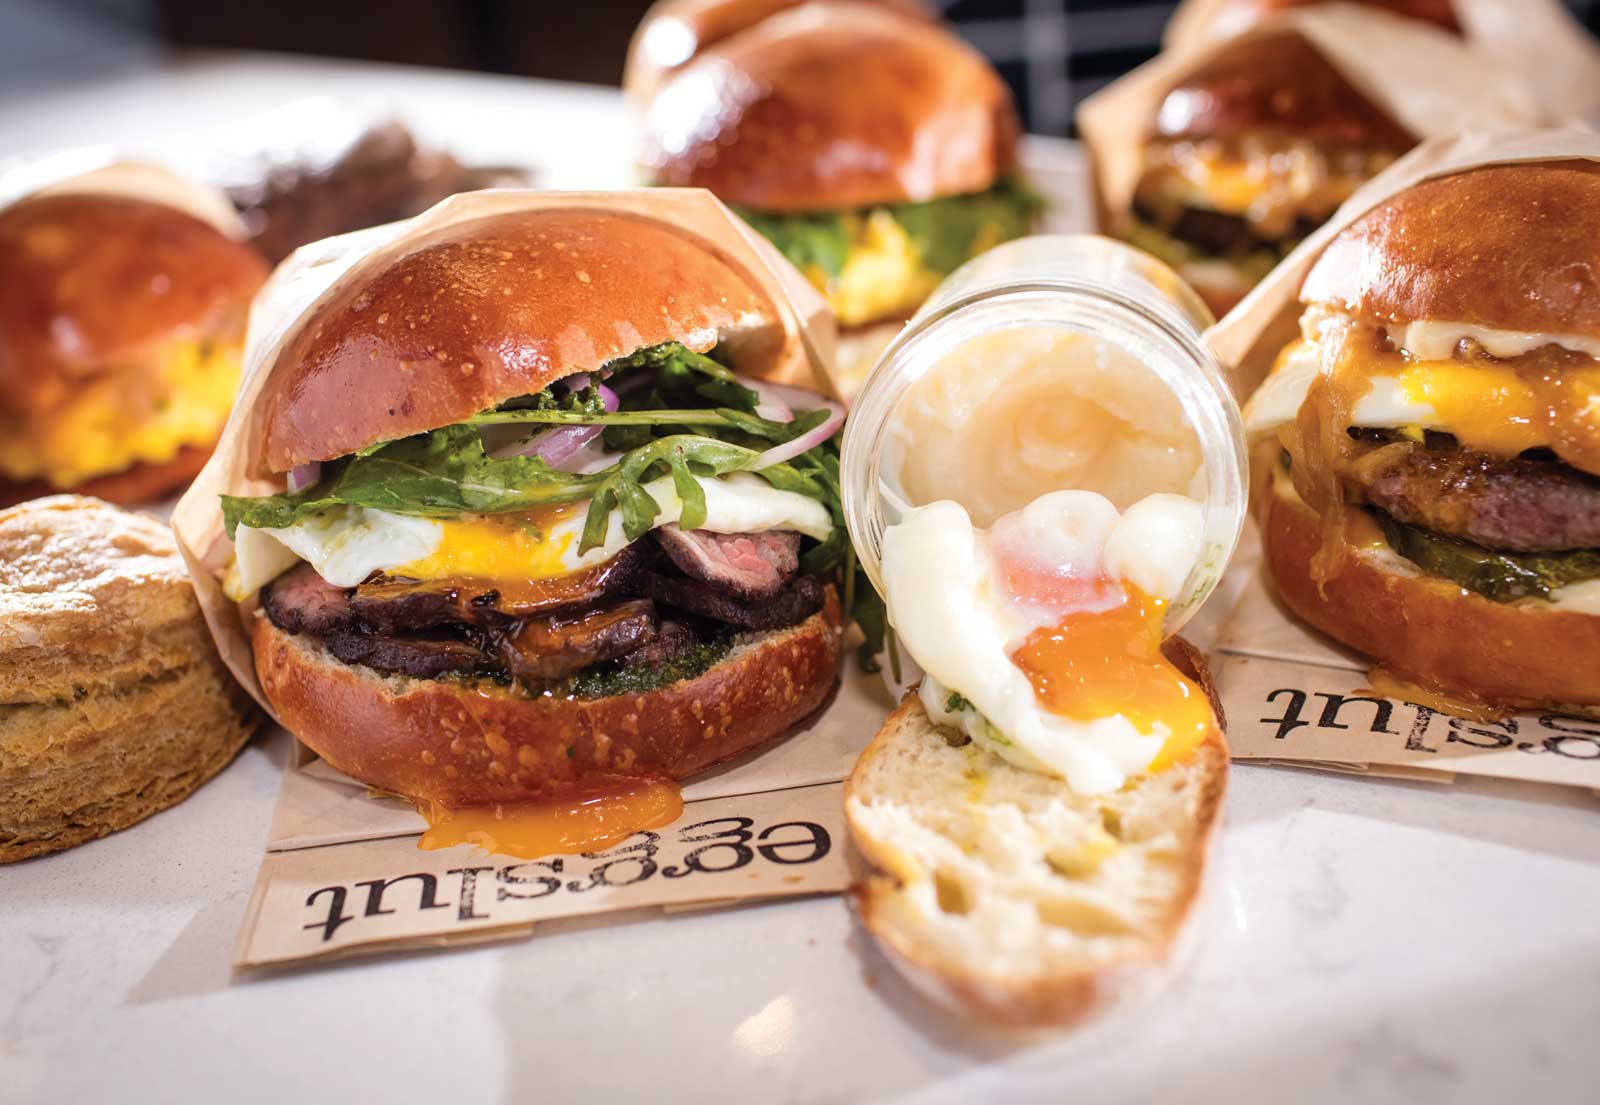 Try breakfast on the twisted side at Eggslut.